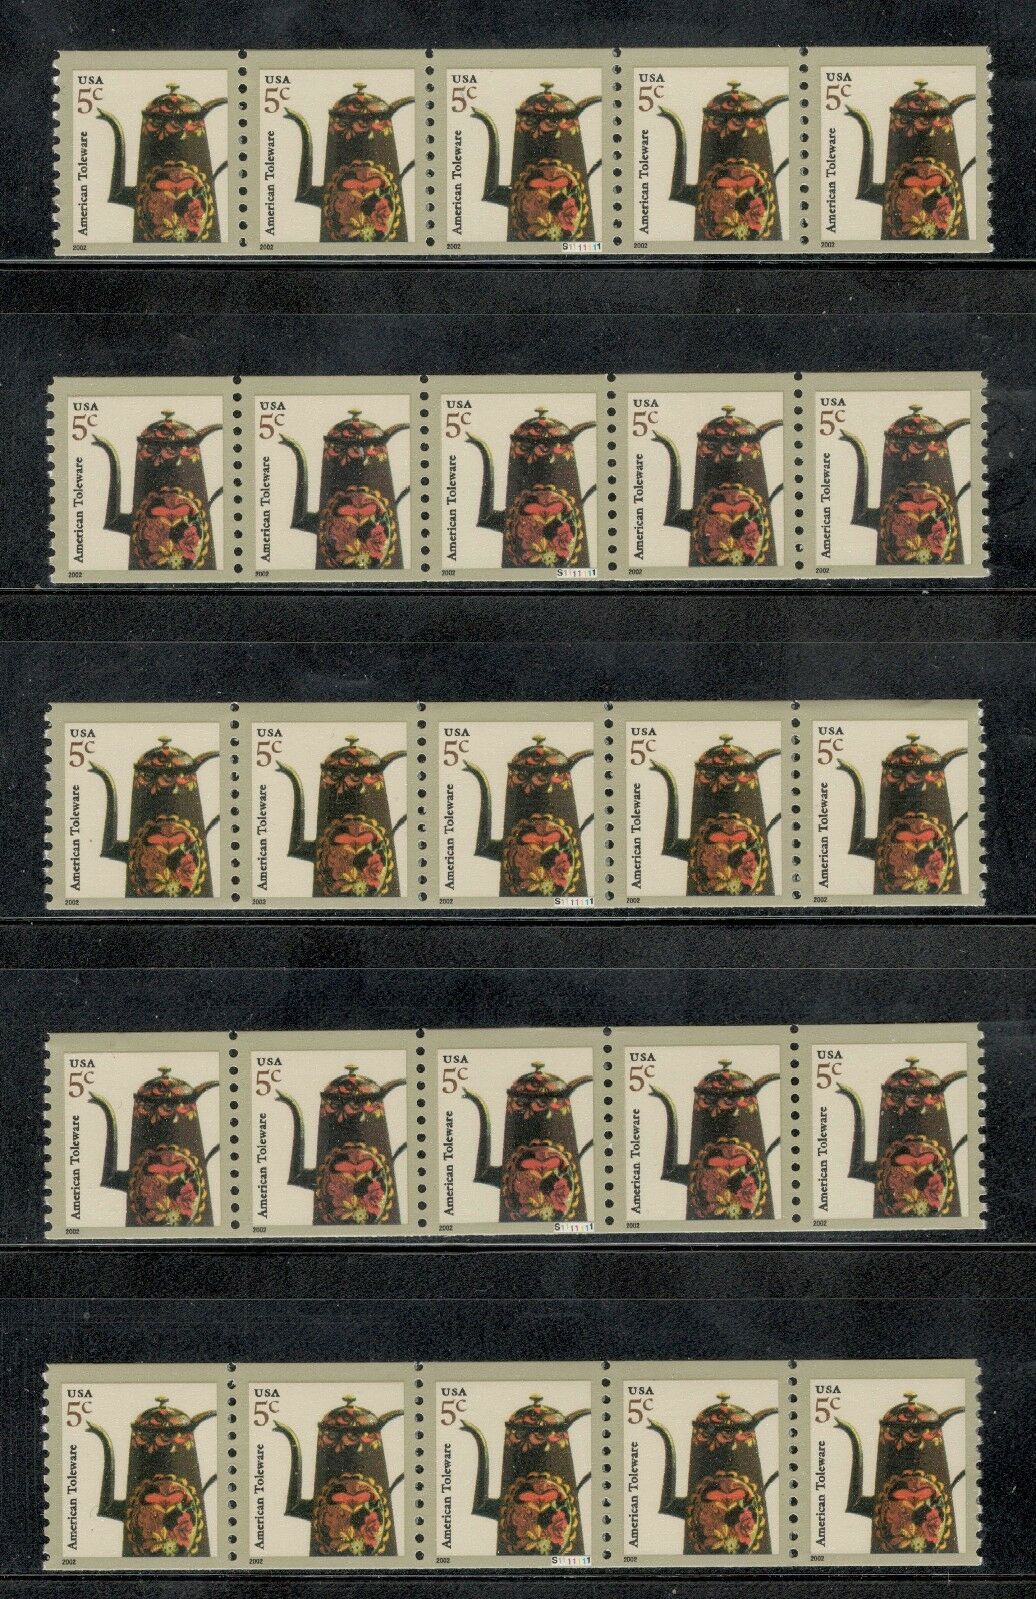 3612 Toleware Coffeepot 5 Pnc Strips Of 5 Mint/nh Free Shipping